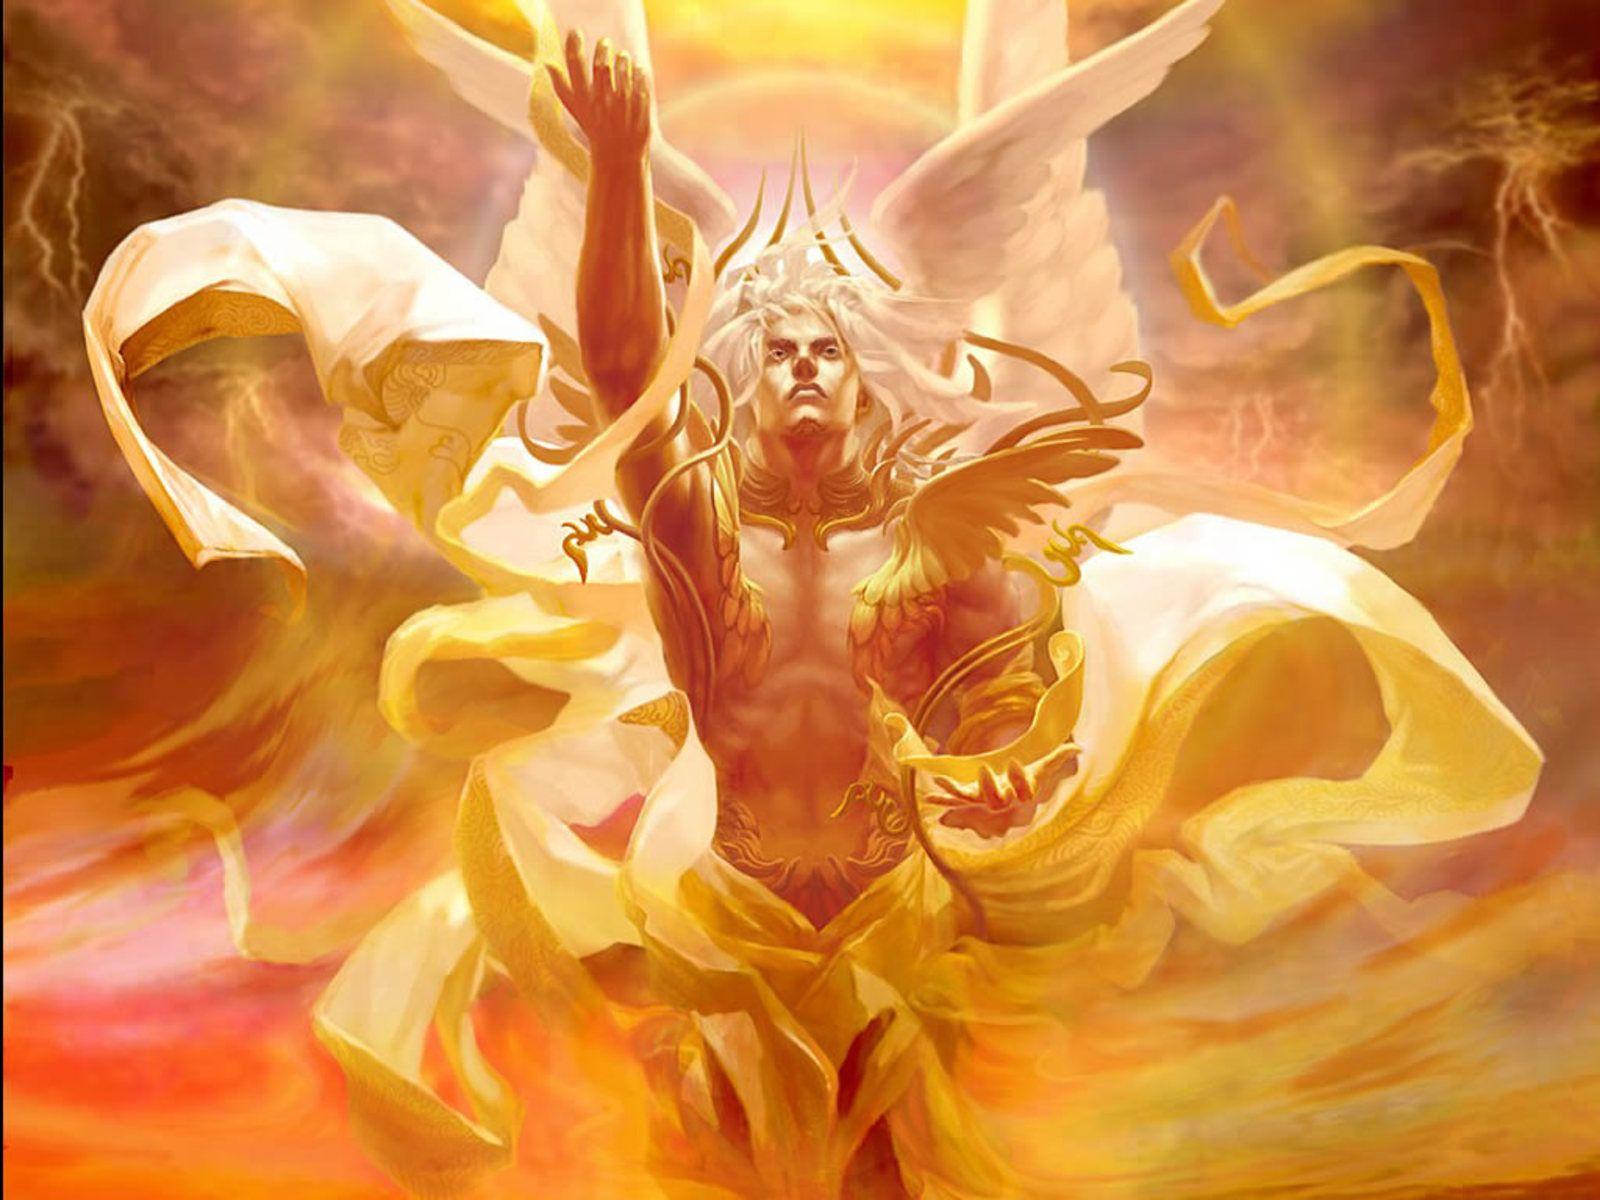 Jeshua and Archangel Michael speak to our Now Light Unfoldment